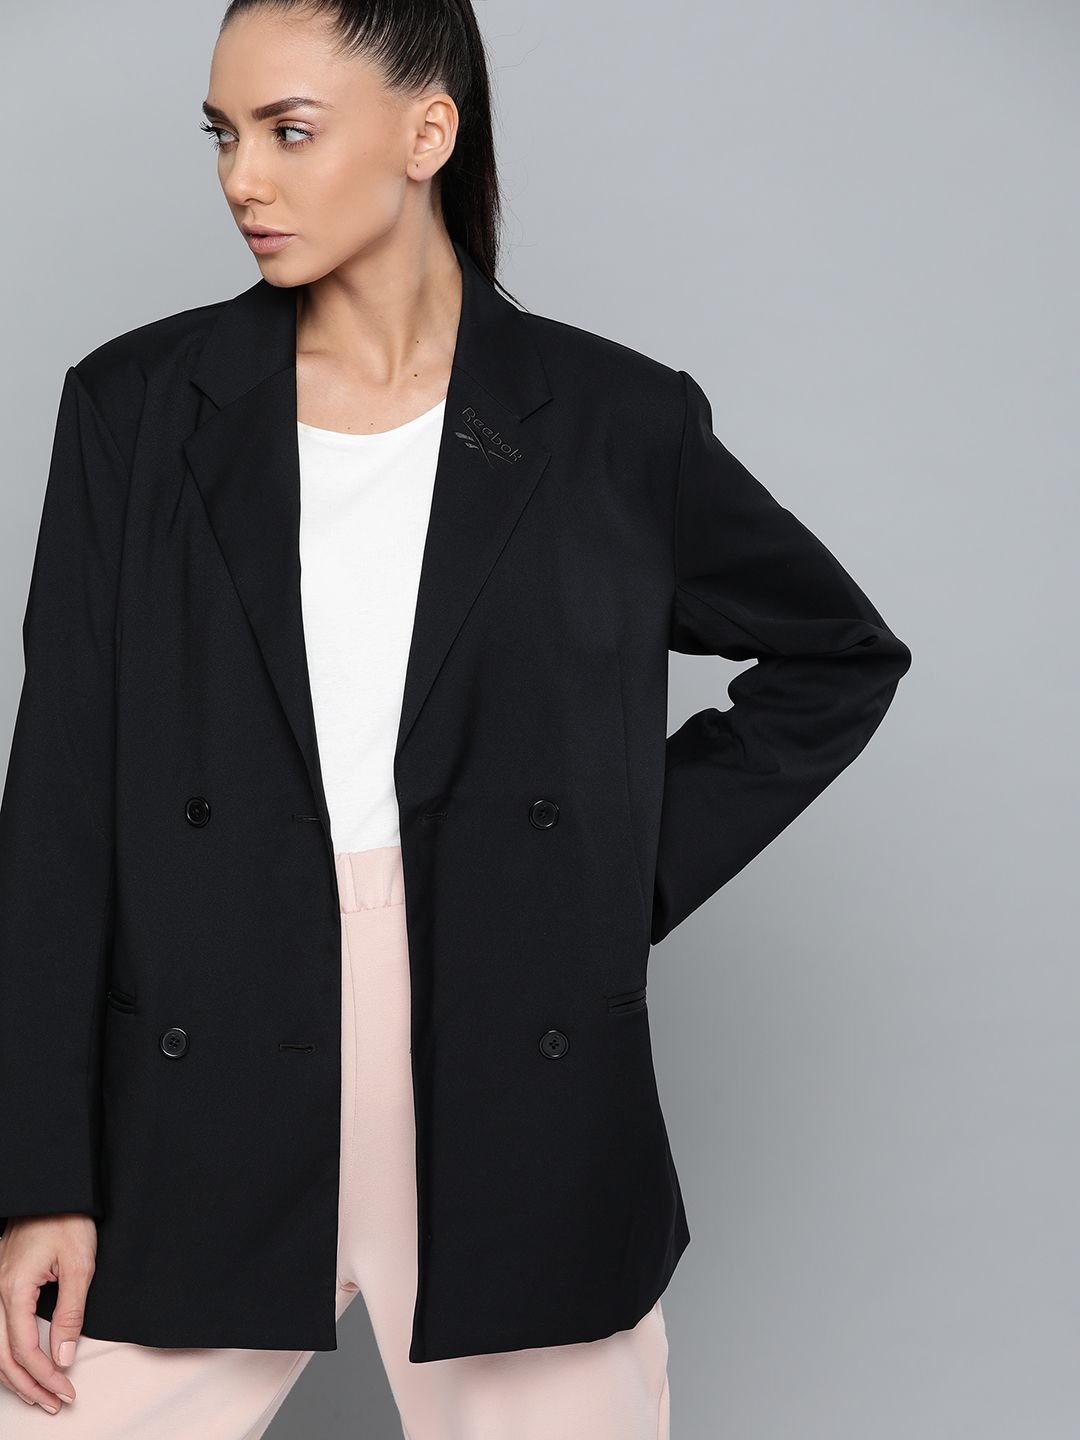 Reebok Classic Women Black Double-Breasted Oversized Fit Solid Blazer Price in India